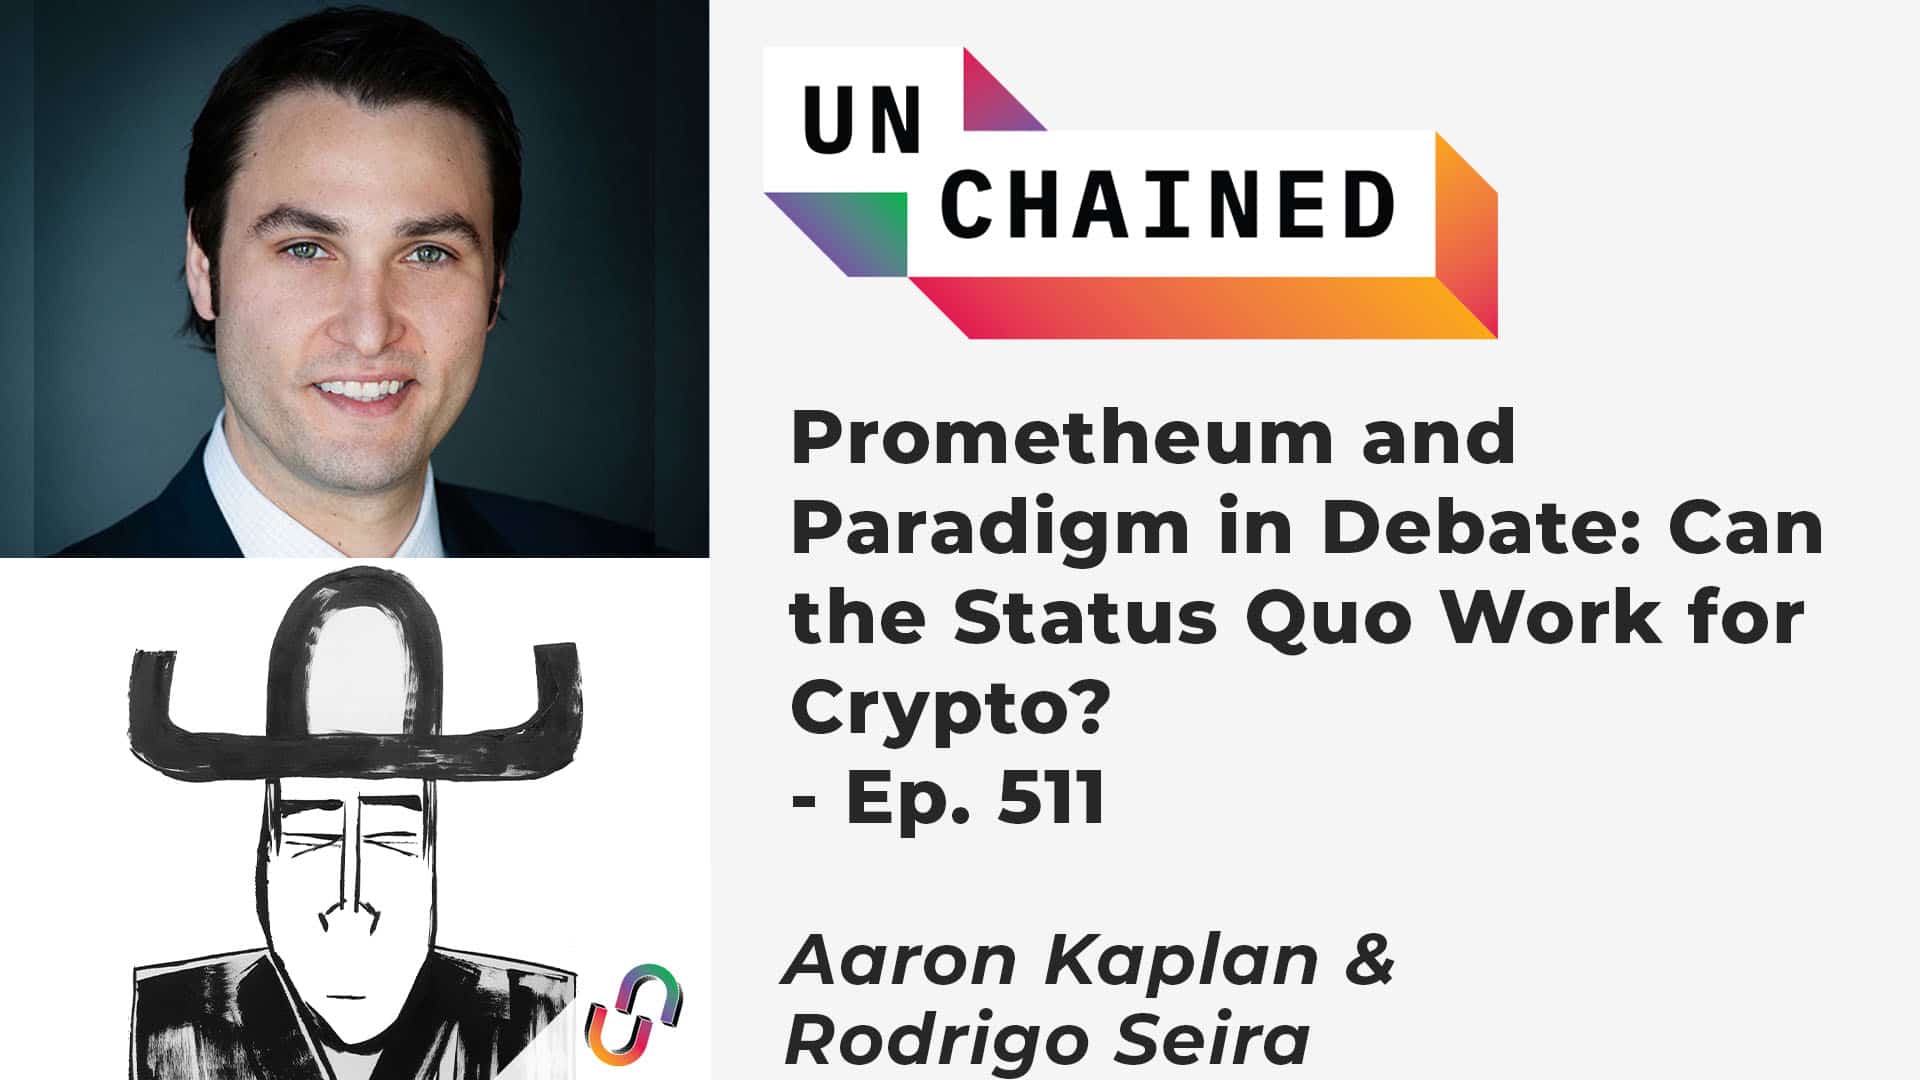 Prometheum and Paradigm in Debate: Can the Status Quo Work for Crypto?